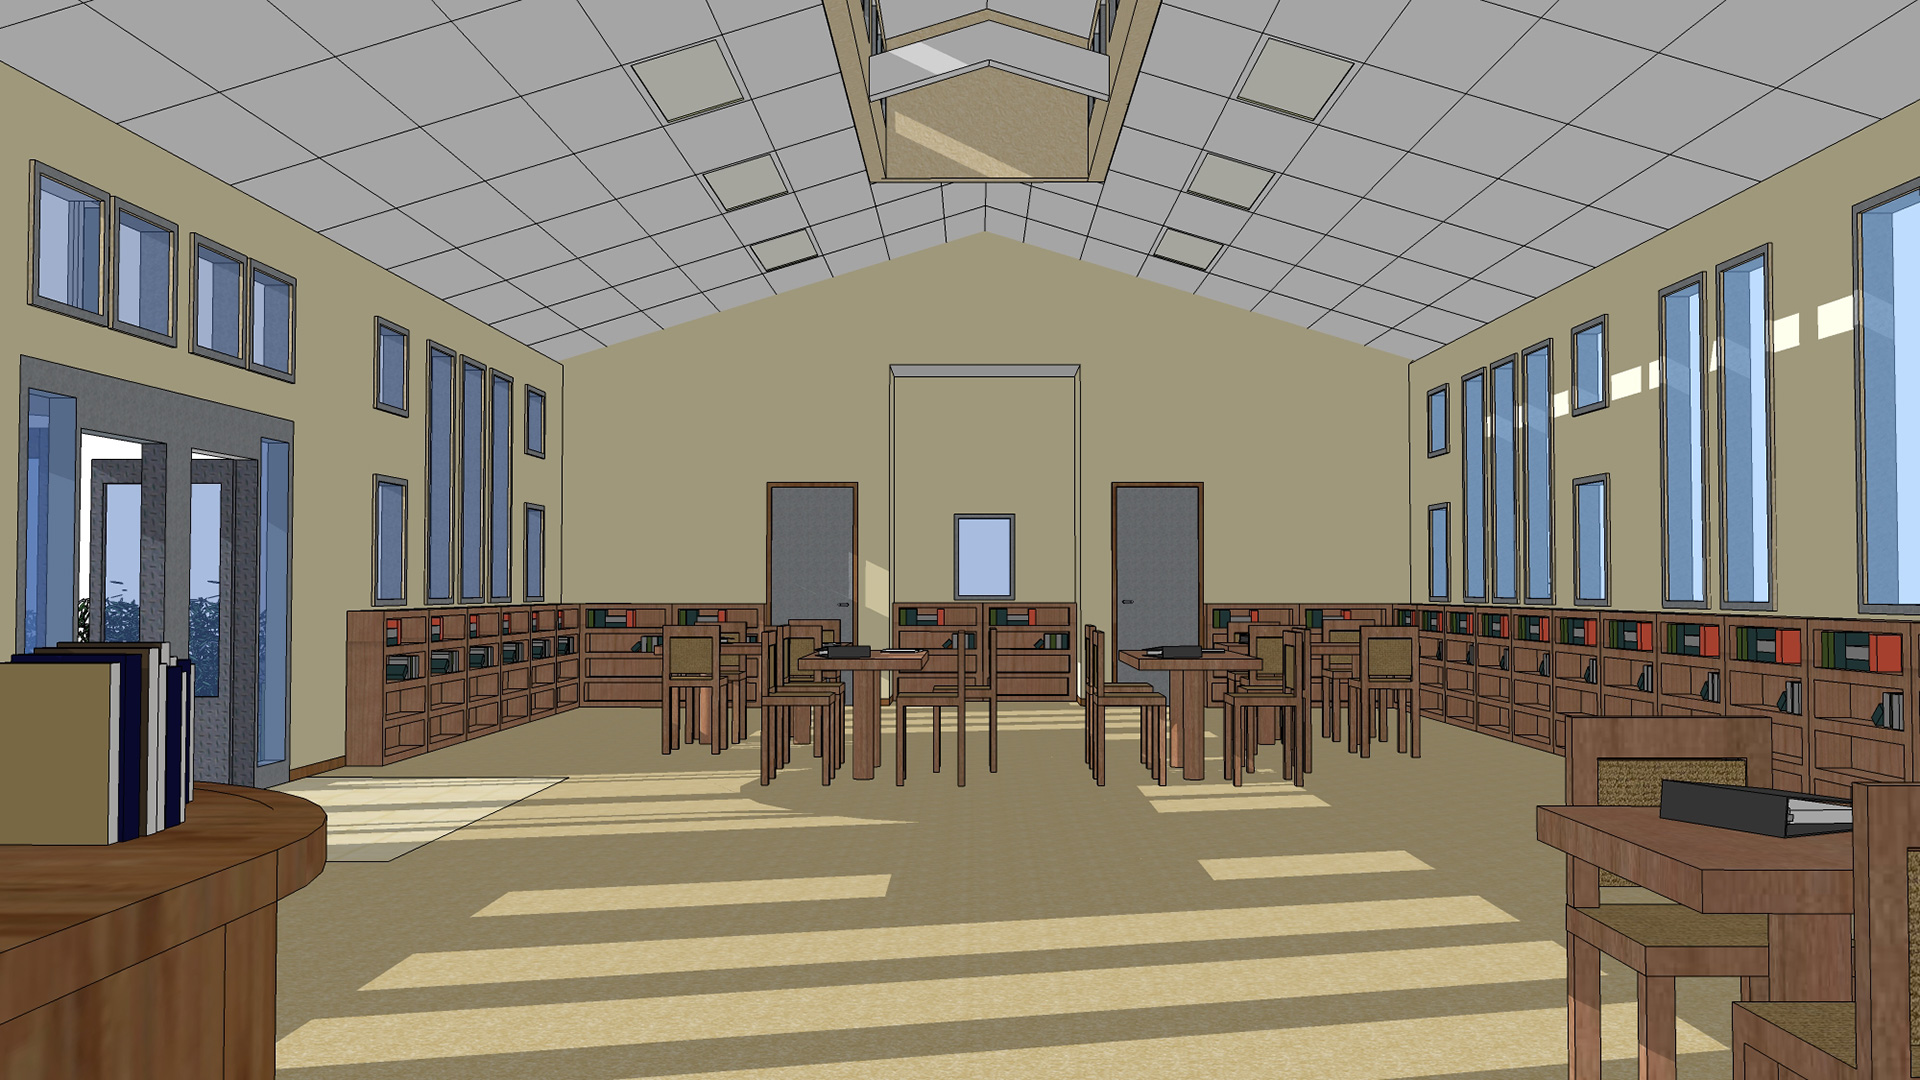 Rendering of library interior, showing wooden tables and chairs, closely representing the finished build.